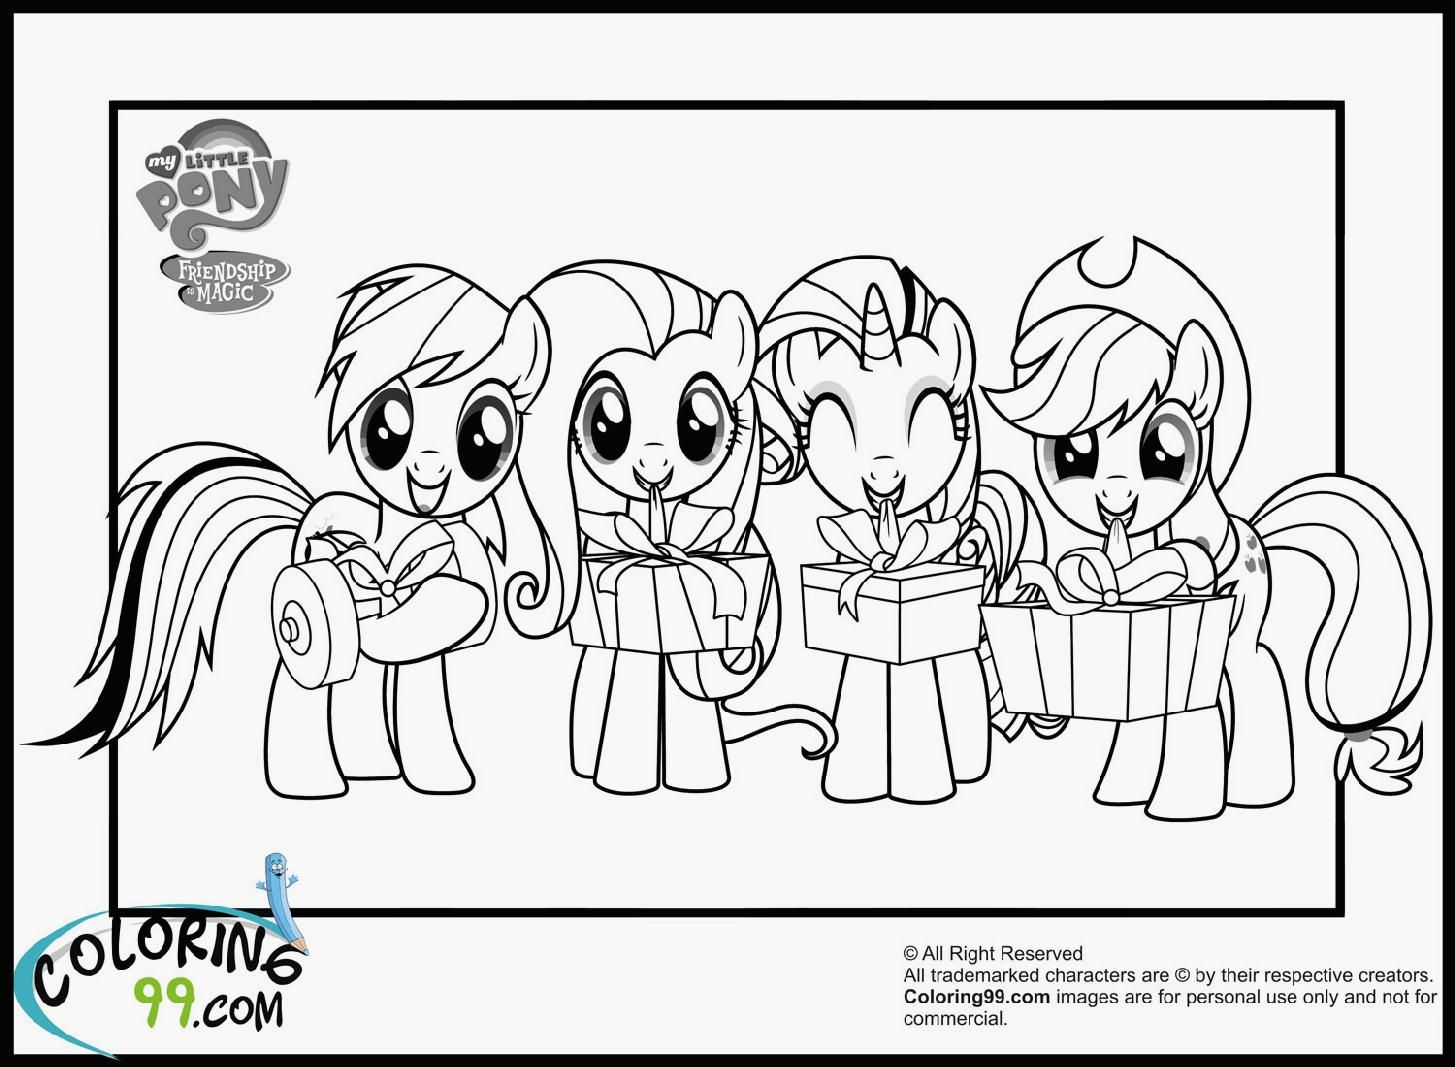 At The Gala My Little Pony Coloring Pages   Coloring Pages For All ...